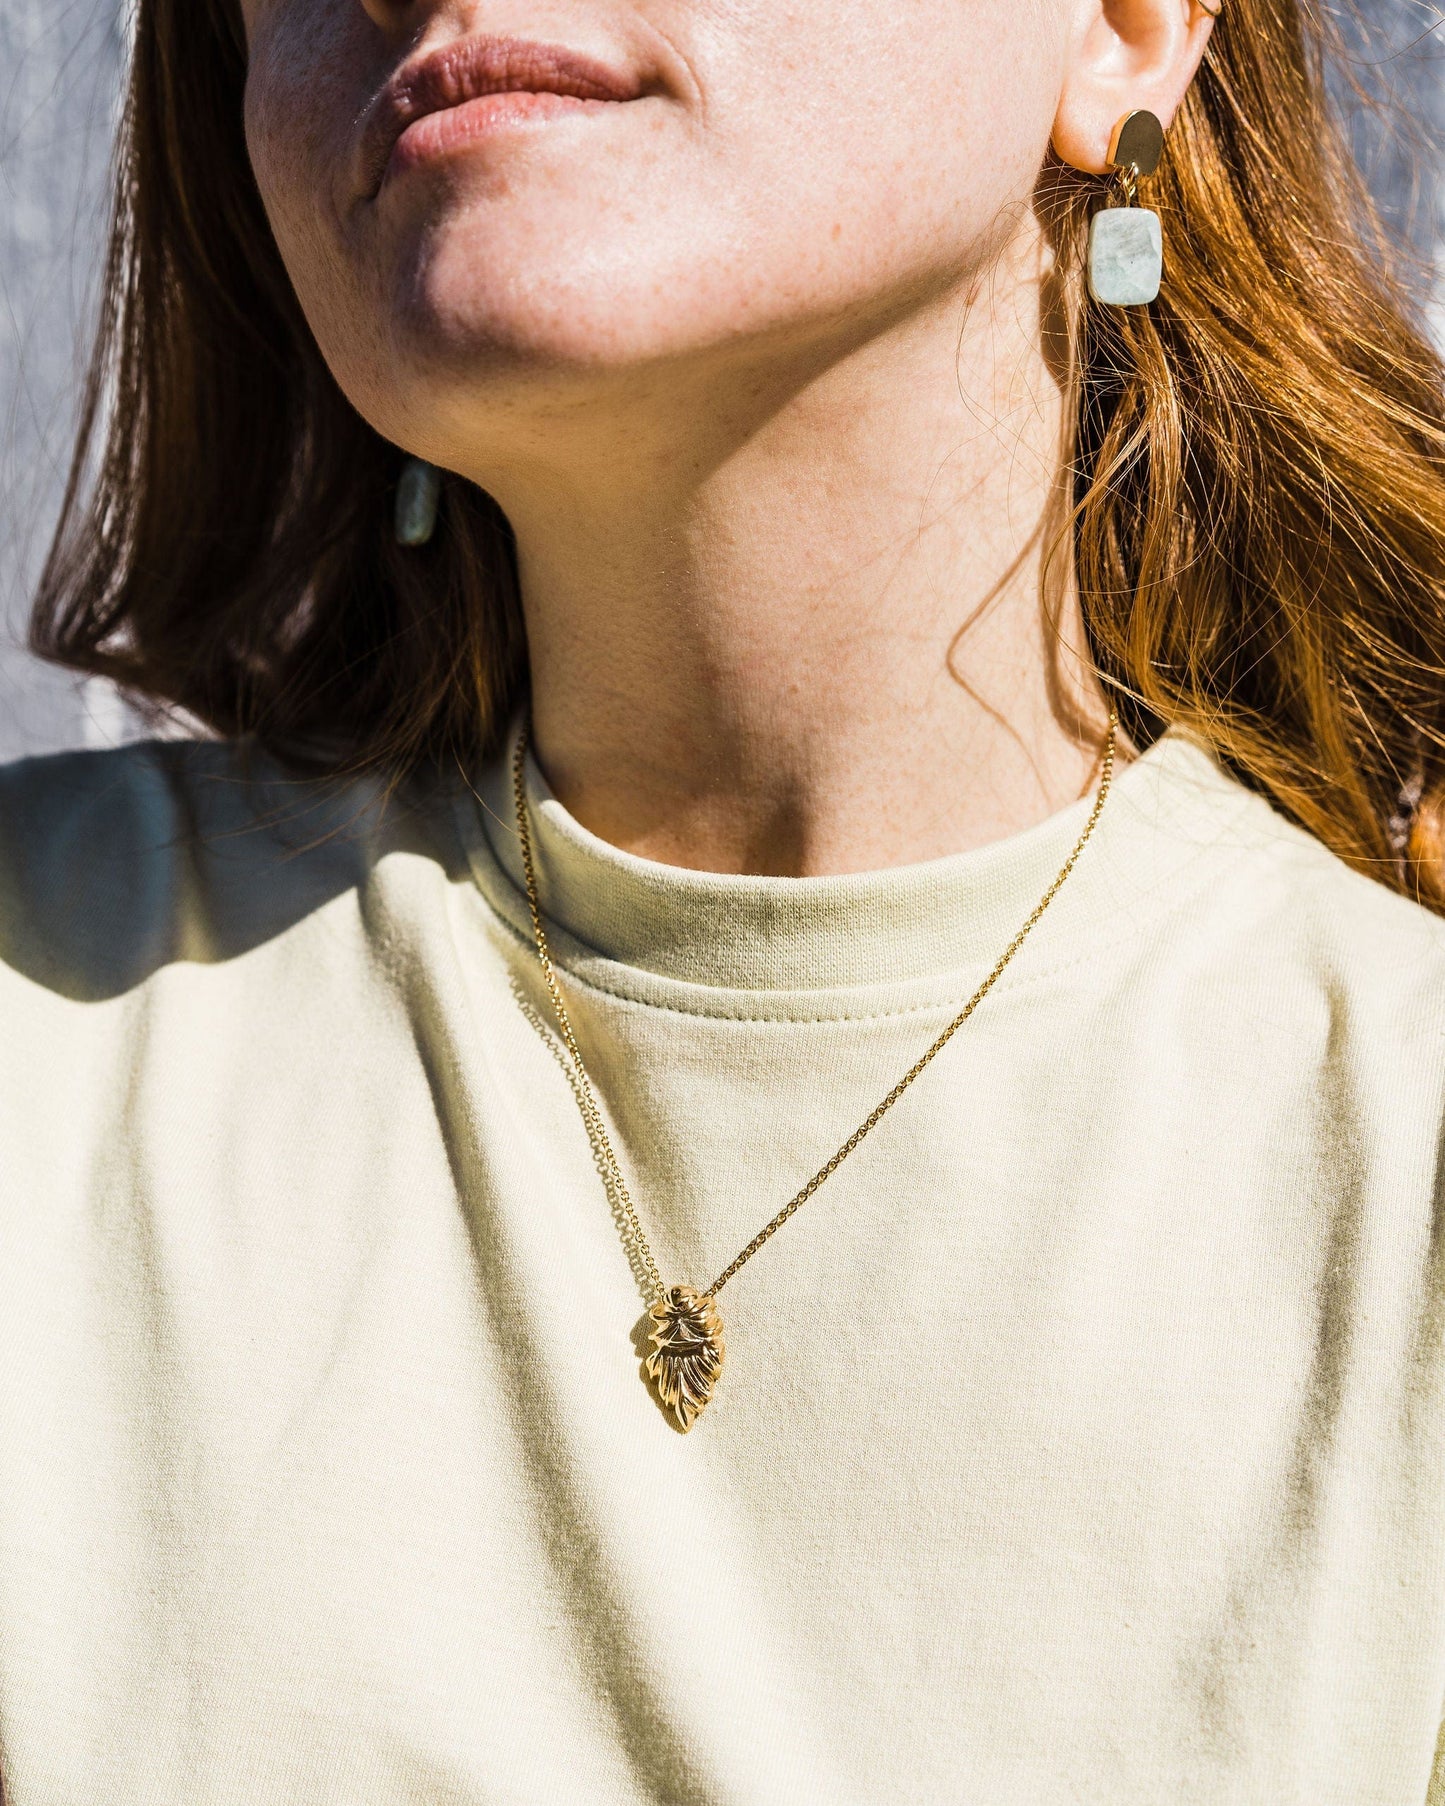 Load image into Gallery viewer, VUE by SEK Earrings gold dome + chrysoprase earrings
